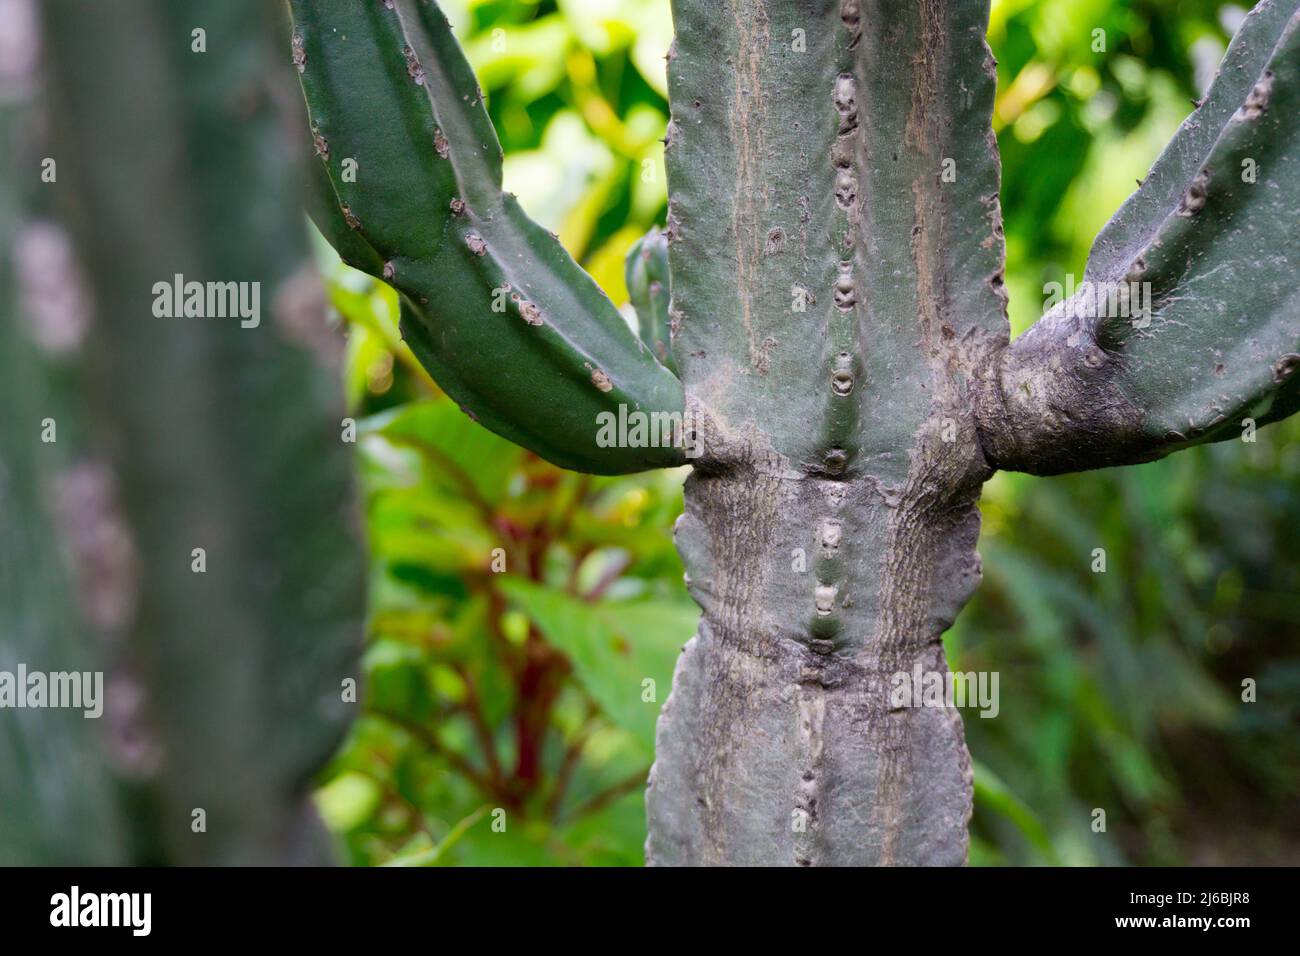 A close p shot of Cereus stenogonus. Cereus stenogonus is a tree-like columnar cactus, with erect stems up to 6 to 8 meters high, much-branched or nea Stock Photo